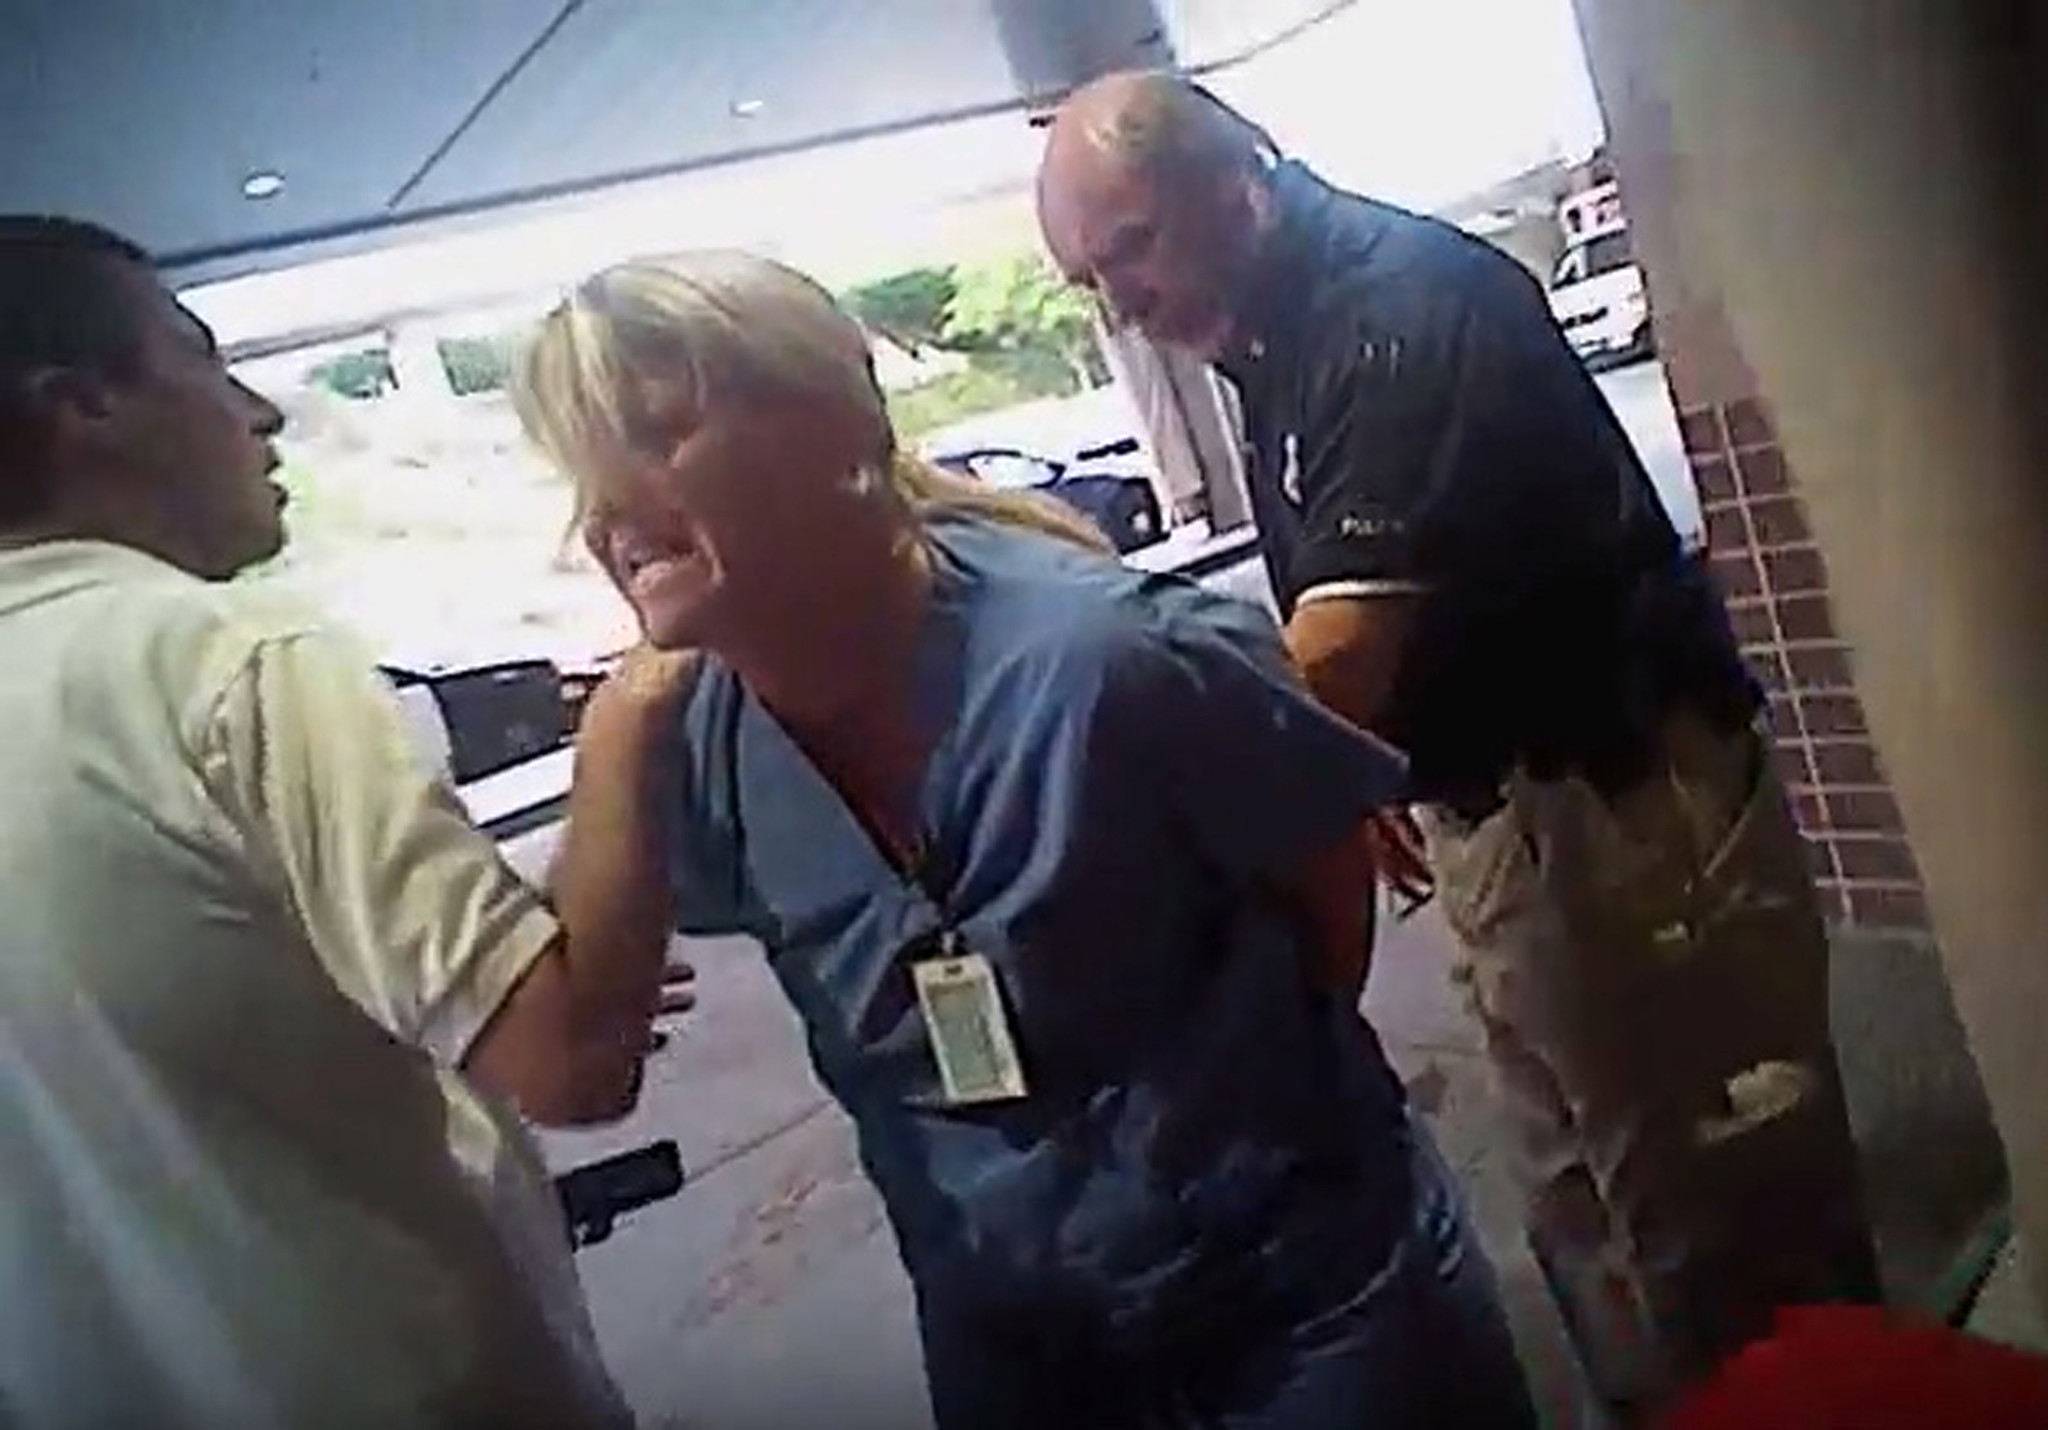 Nurse arrested after refusing an officers request to draw 